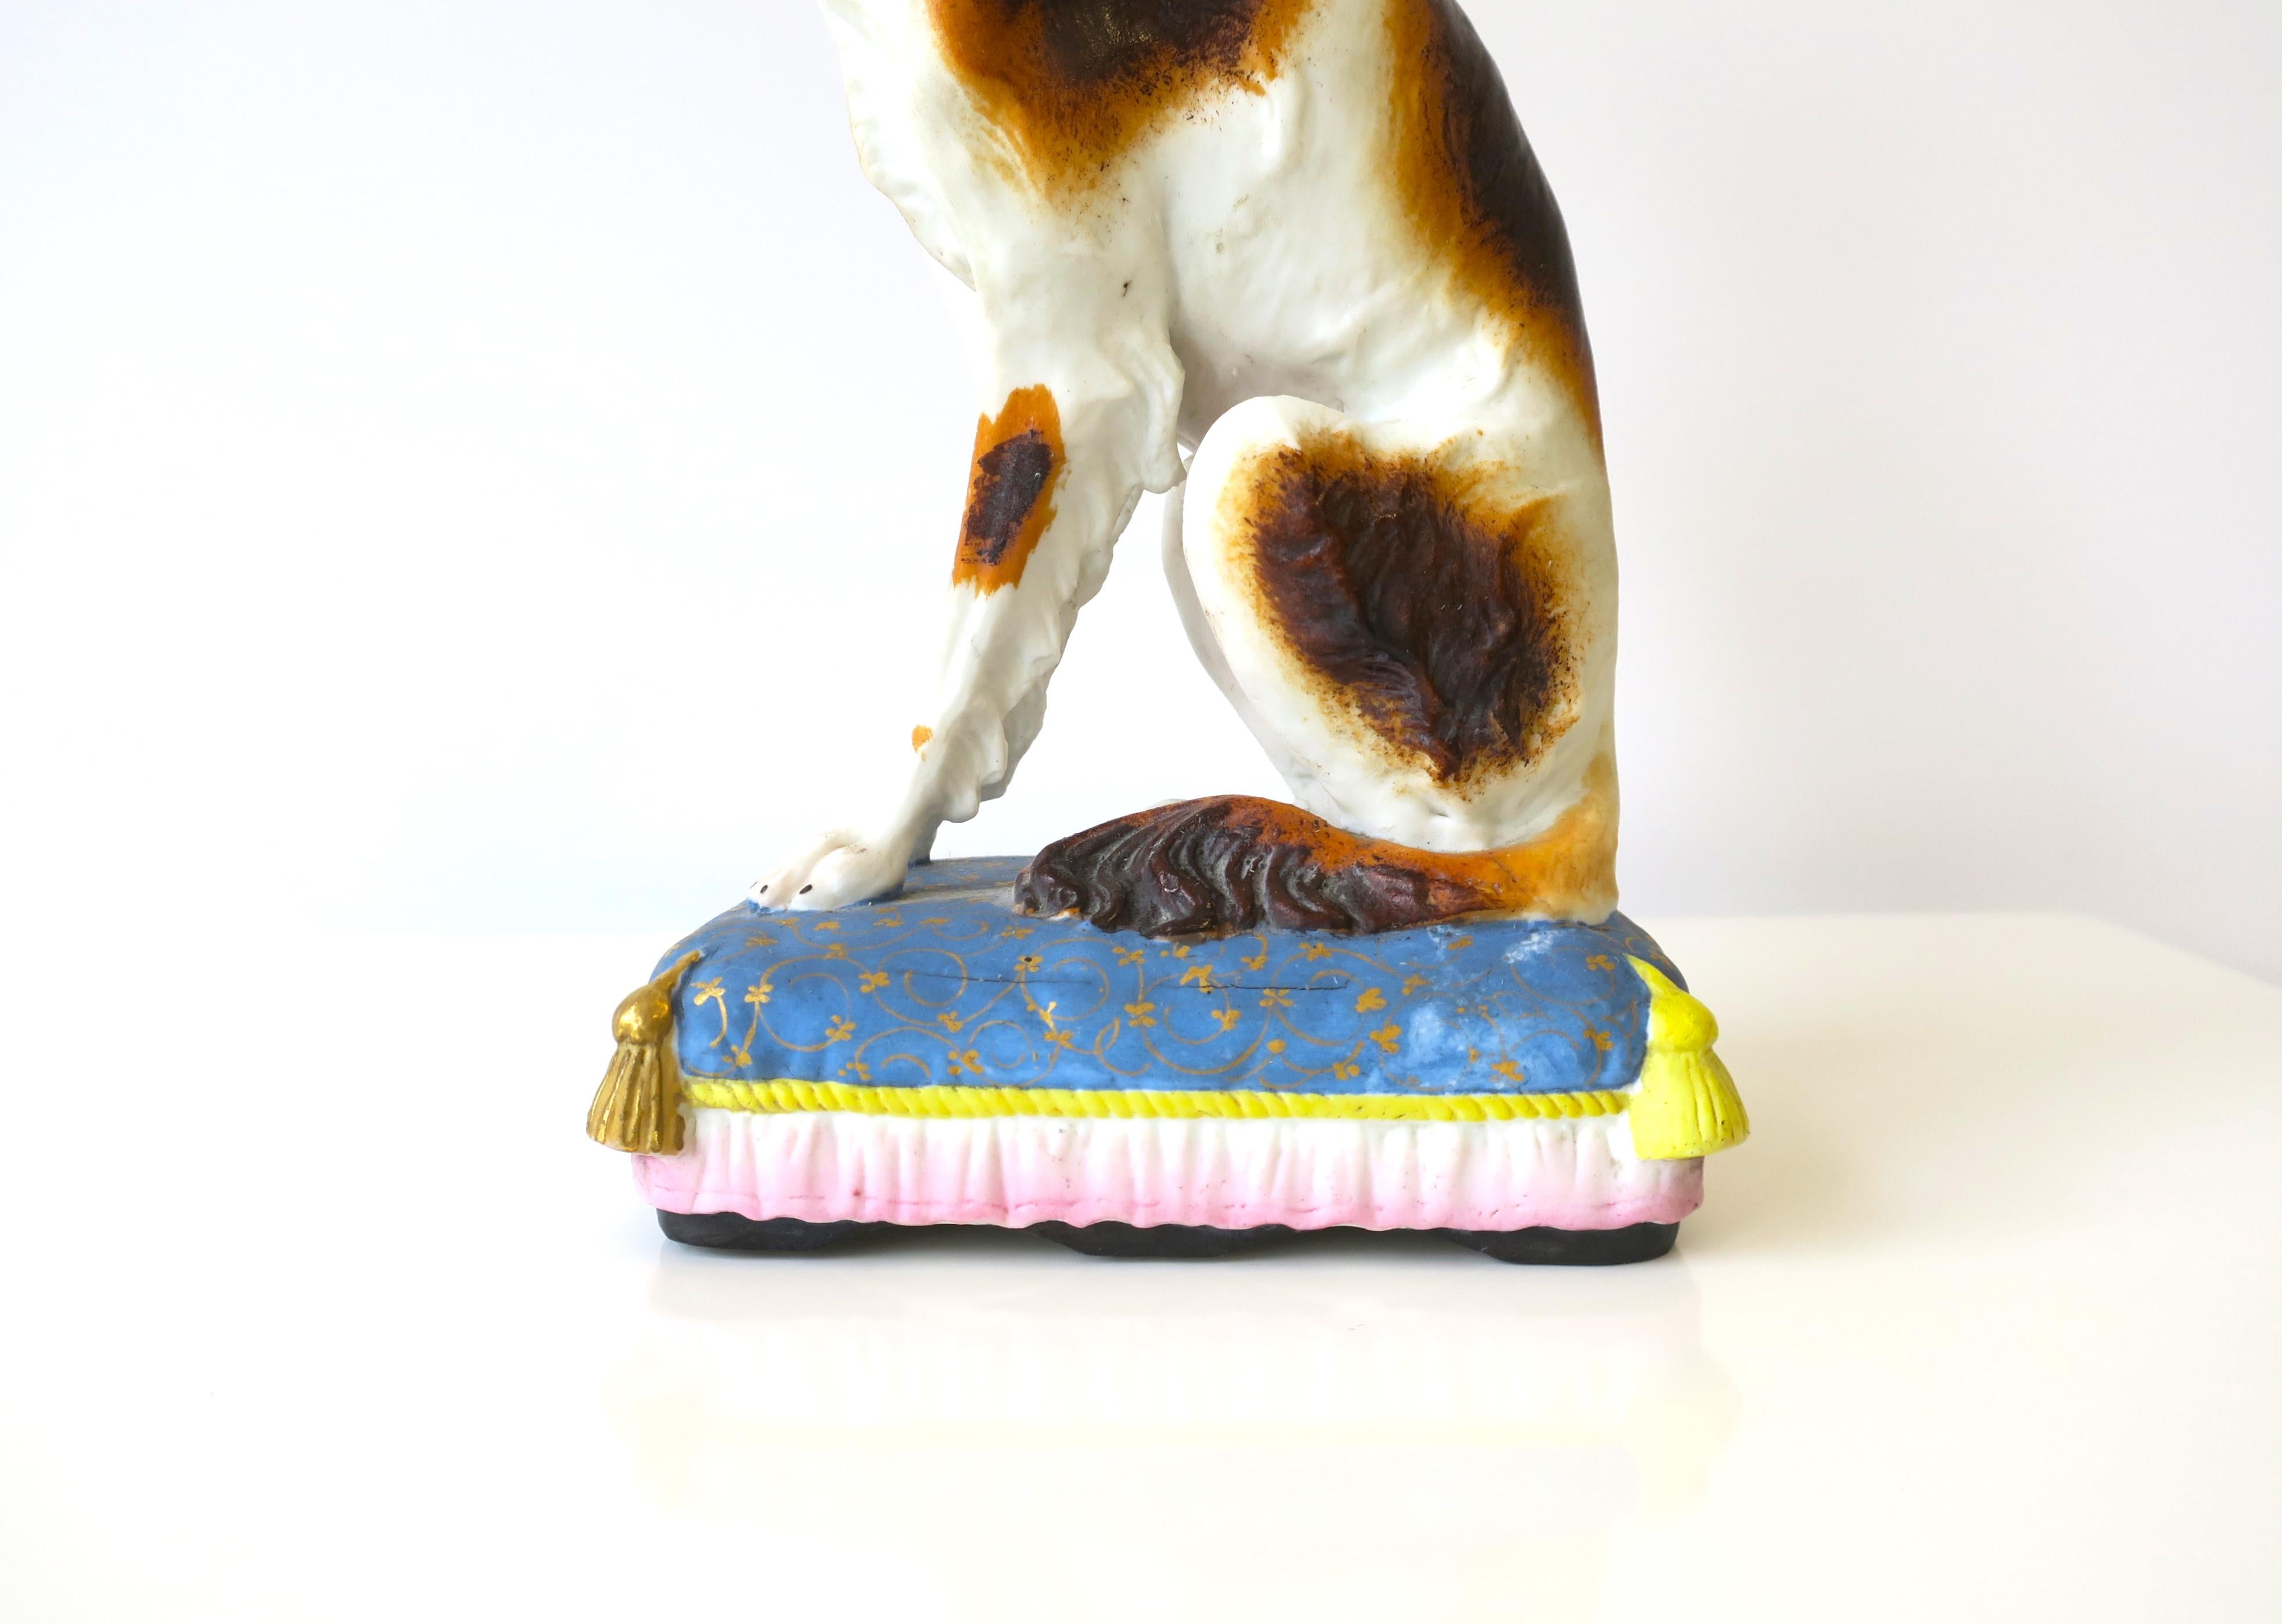 Porcelain Dog on Pillow with Tassels Decorative Object, circa Mid-20th Century For Sale 7